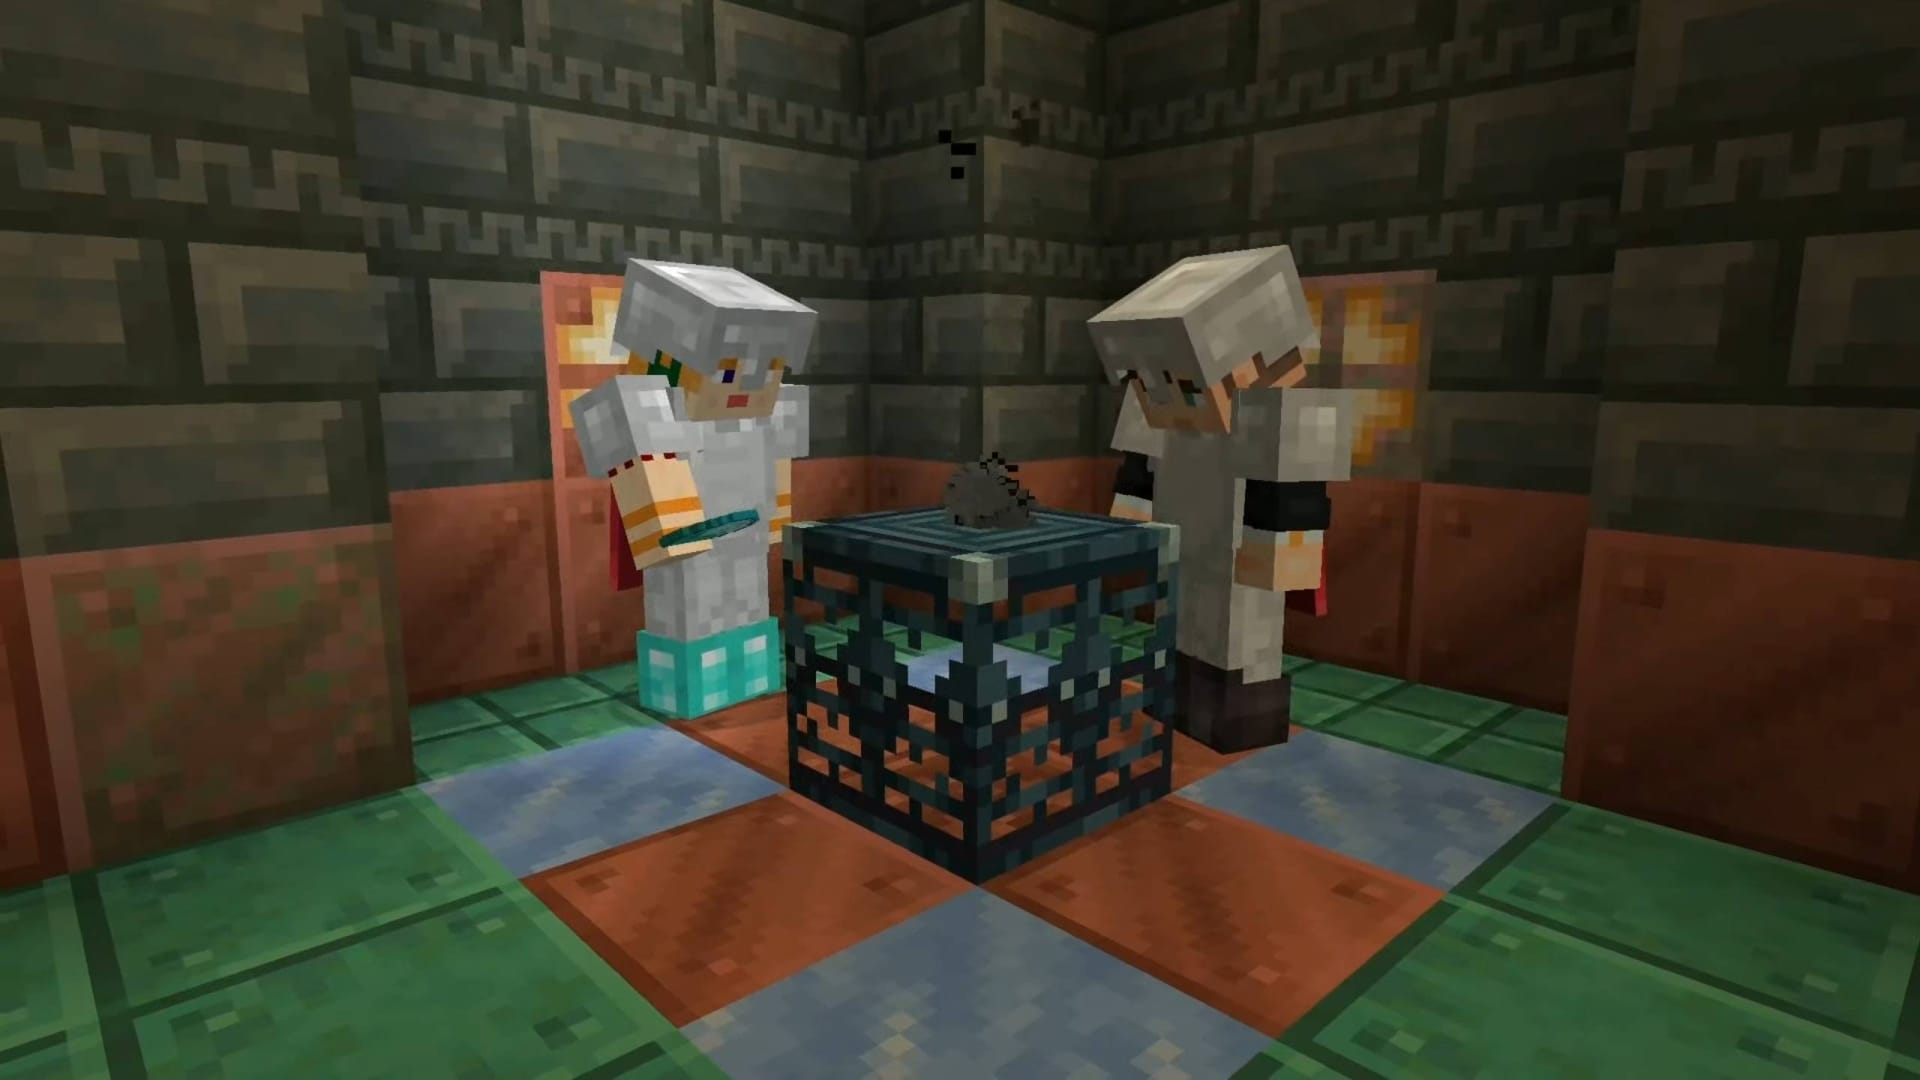 When will Mojang announce Minecraft Mob Vote 2023 candidates?